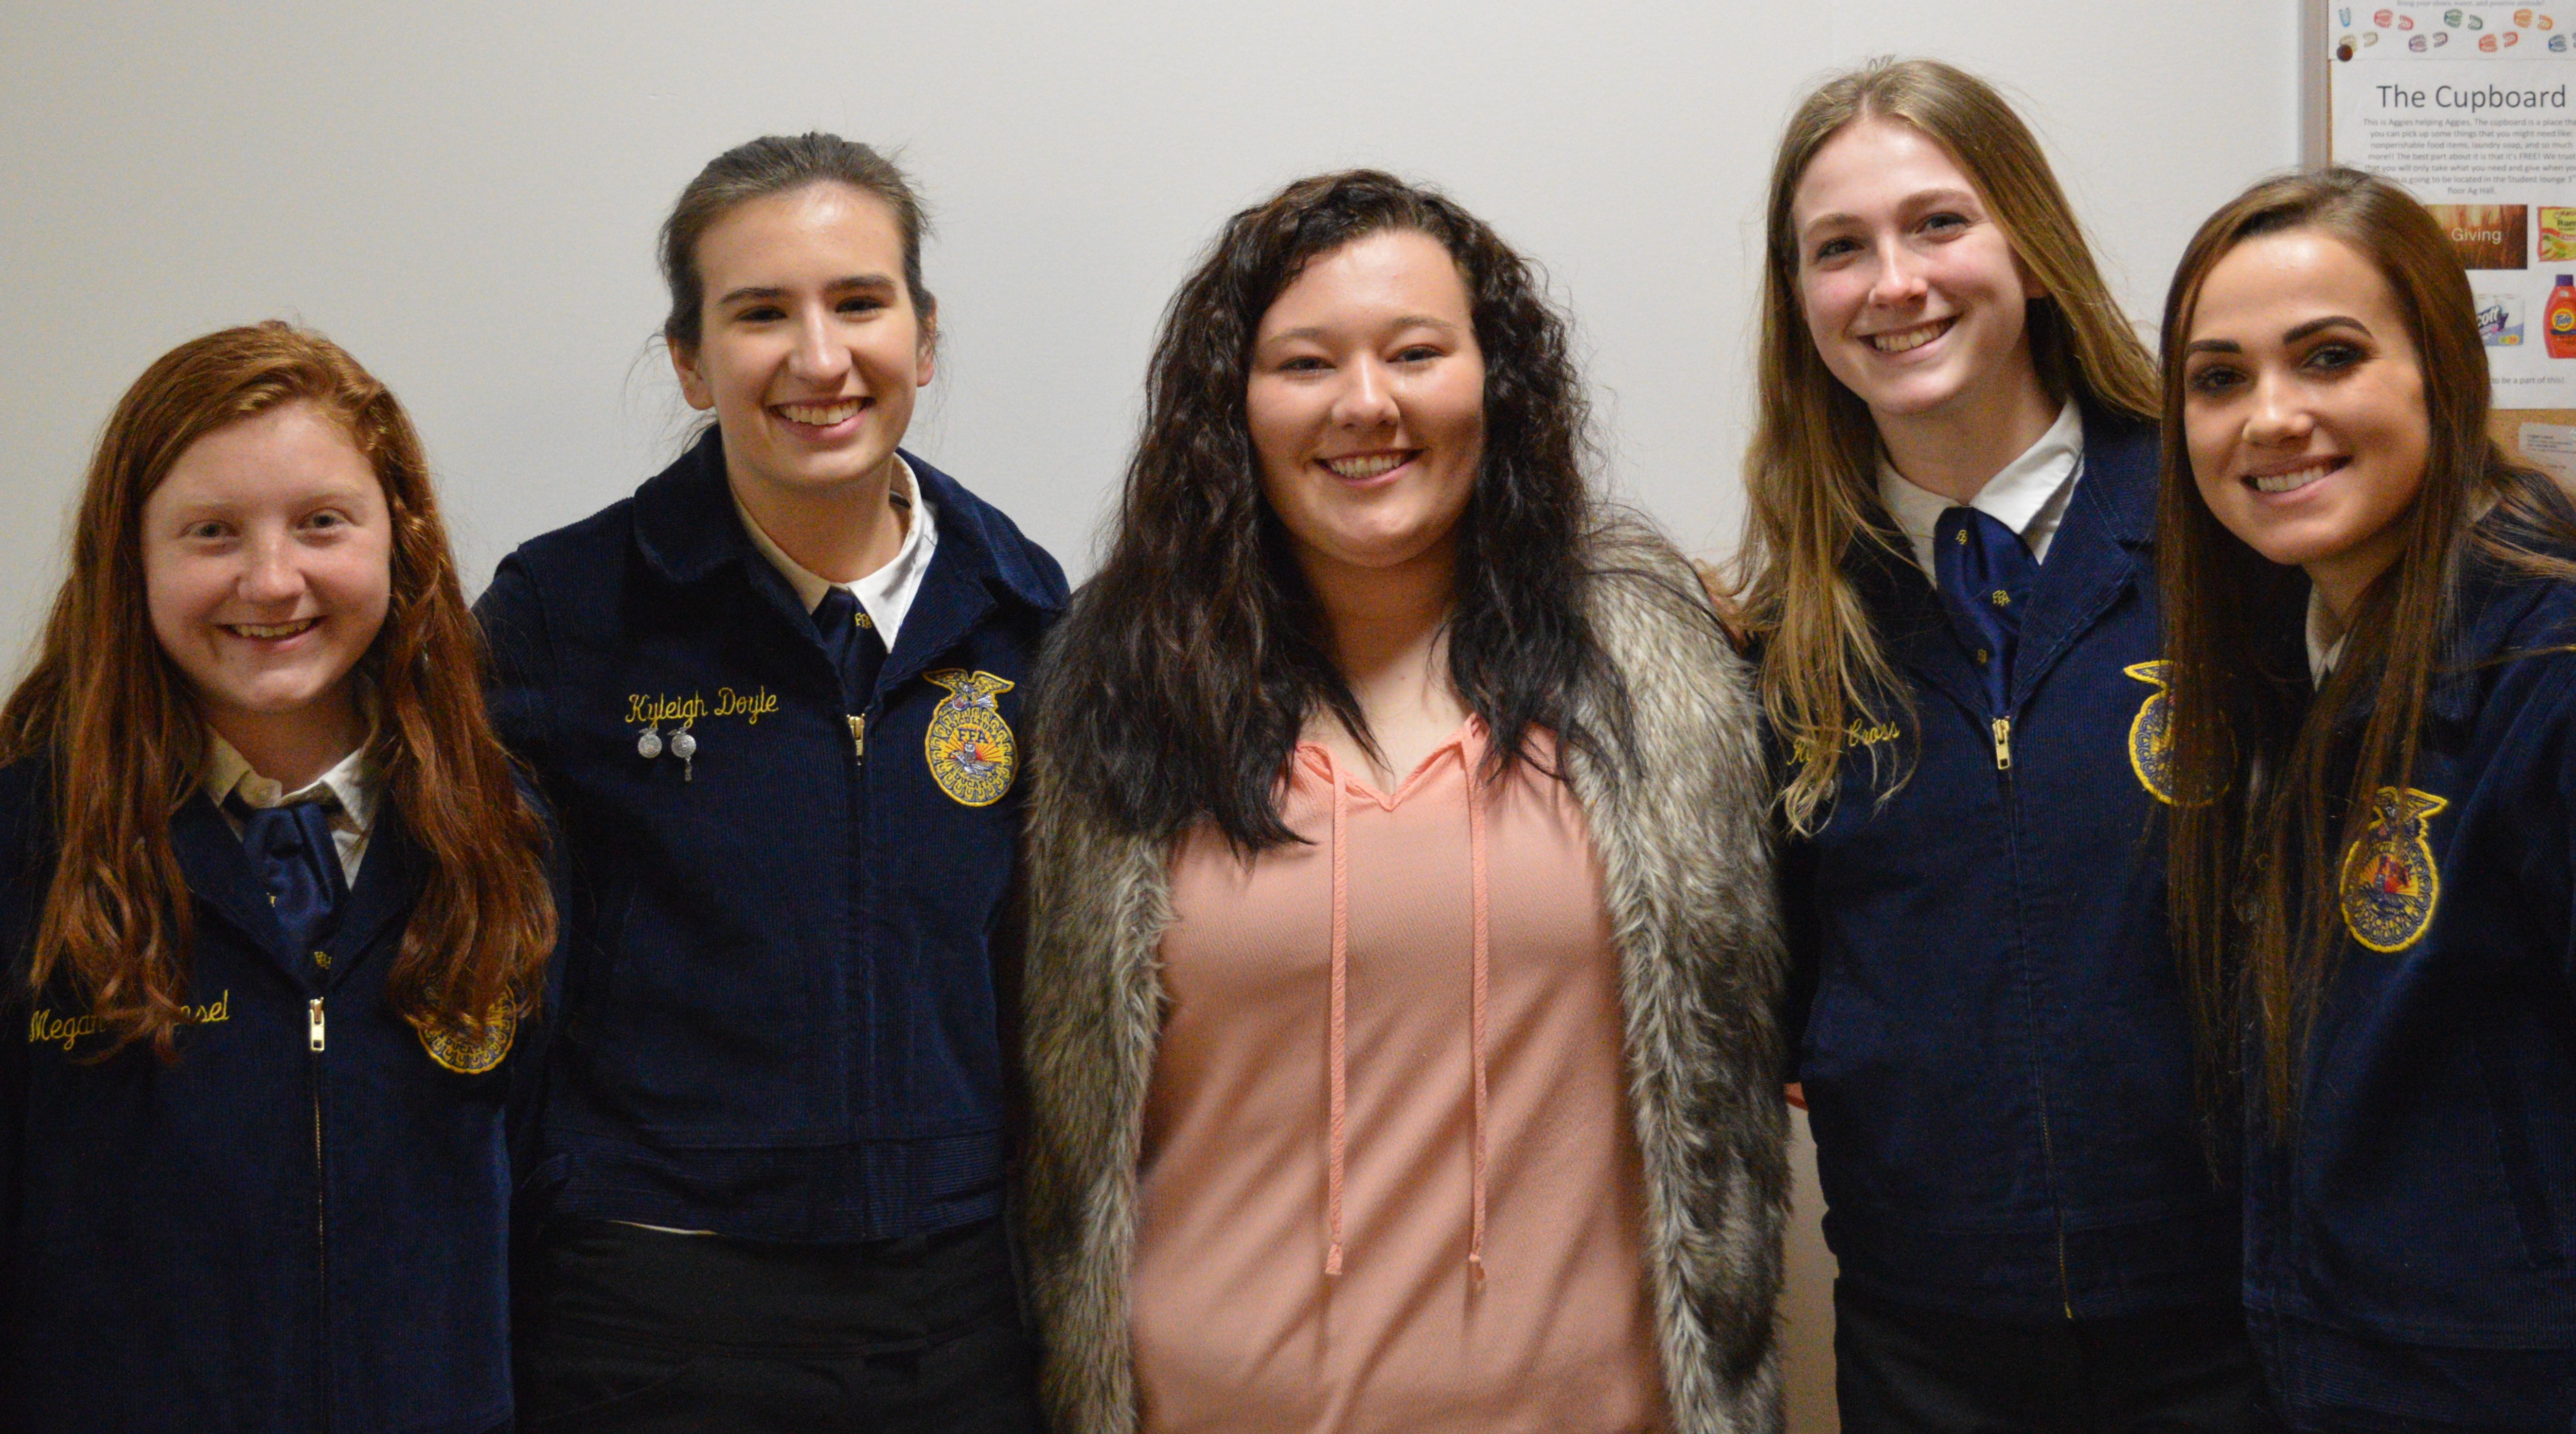 NCTA agricultural education major Kayla Mues of Cambridge visits with high school friends, Megan and Kyleigh, to her left, with Rylee and Taylor, to her right during a District 11 FFA contest in Curtis. Kayla is among NCTA Aggies assisting at FFA convention and contests in Lincoln this week. (Jocelyn Kennicutt / NCTA News photo)